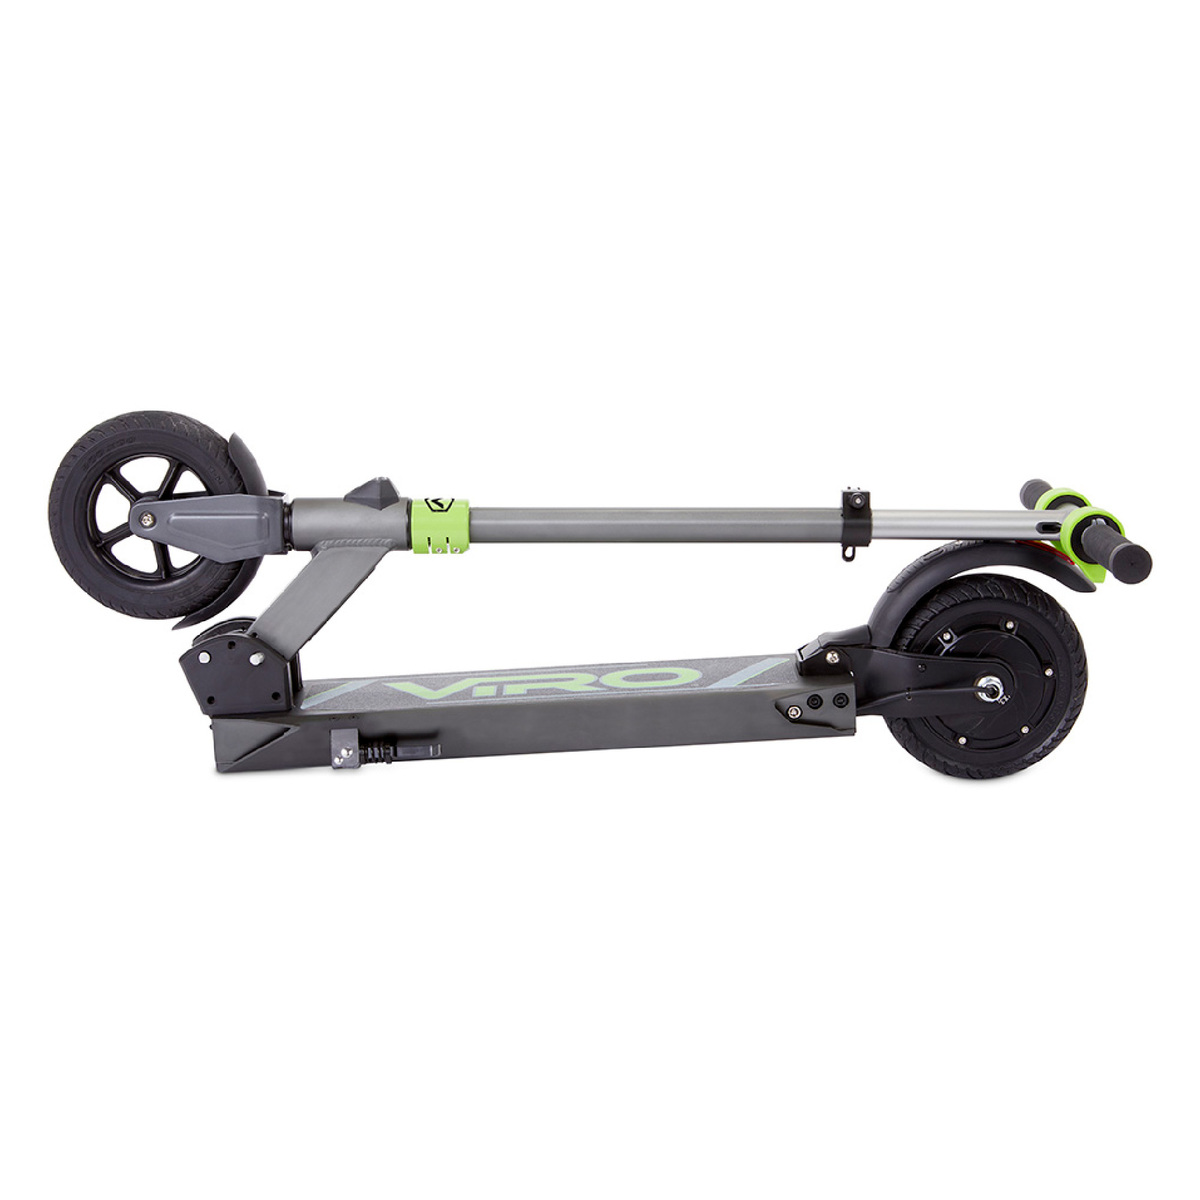 Viro Alloy Adult Electric Scooter, 36V, Green, VR950